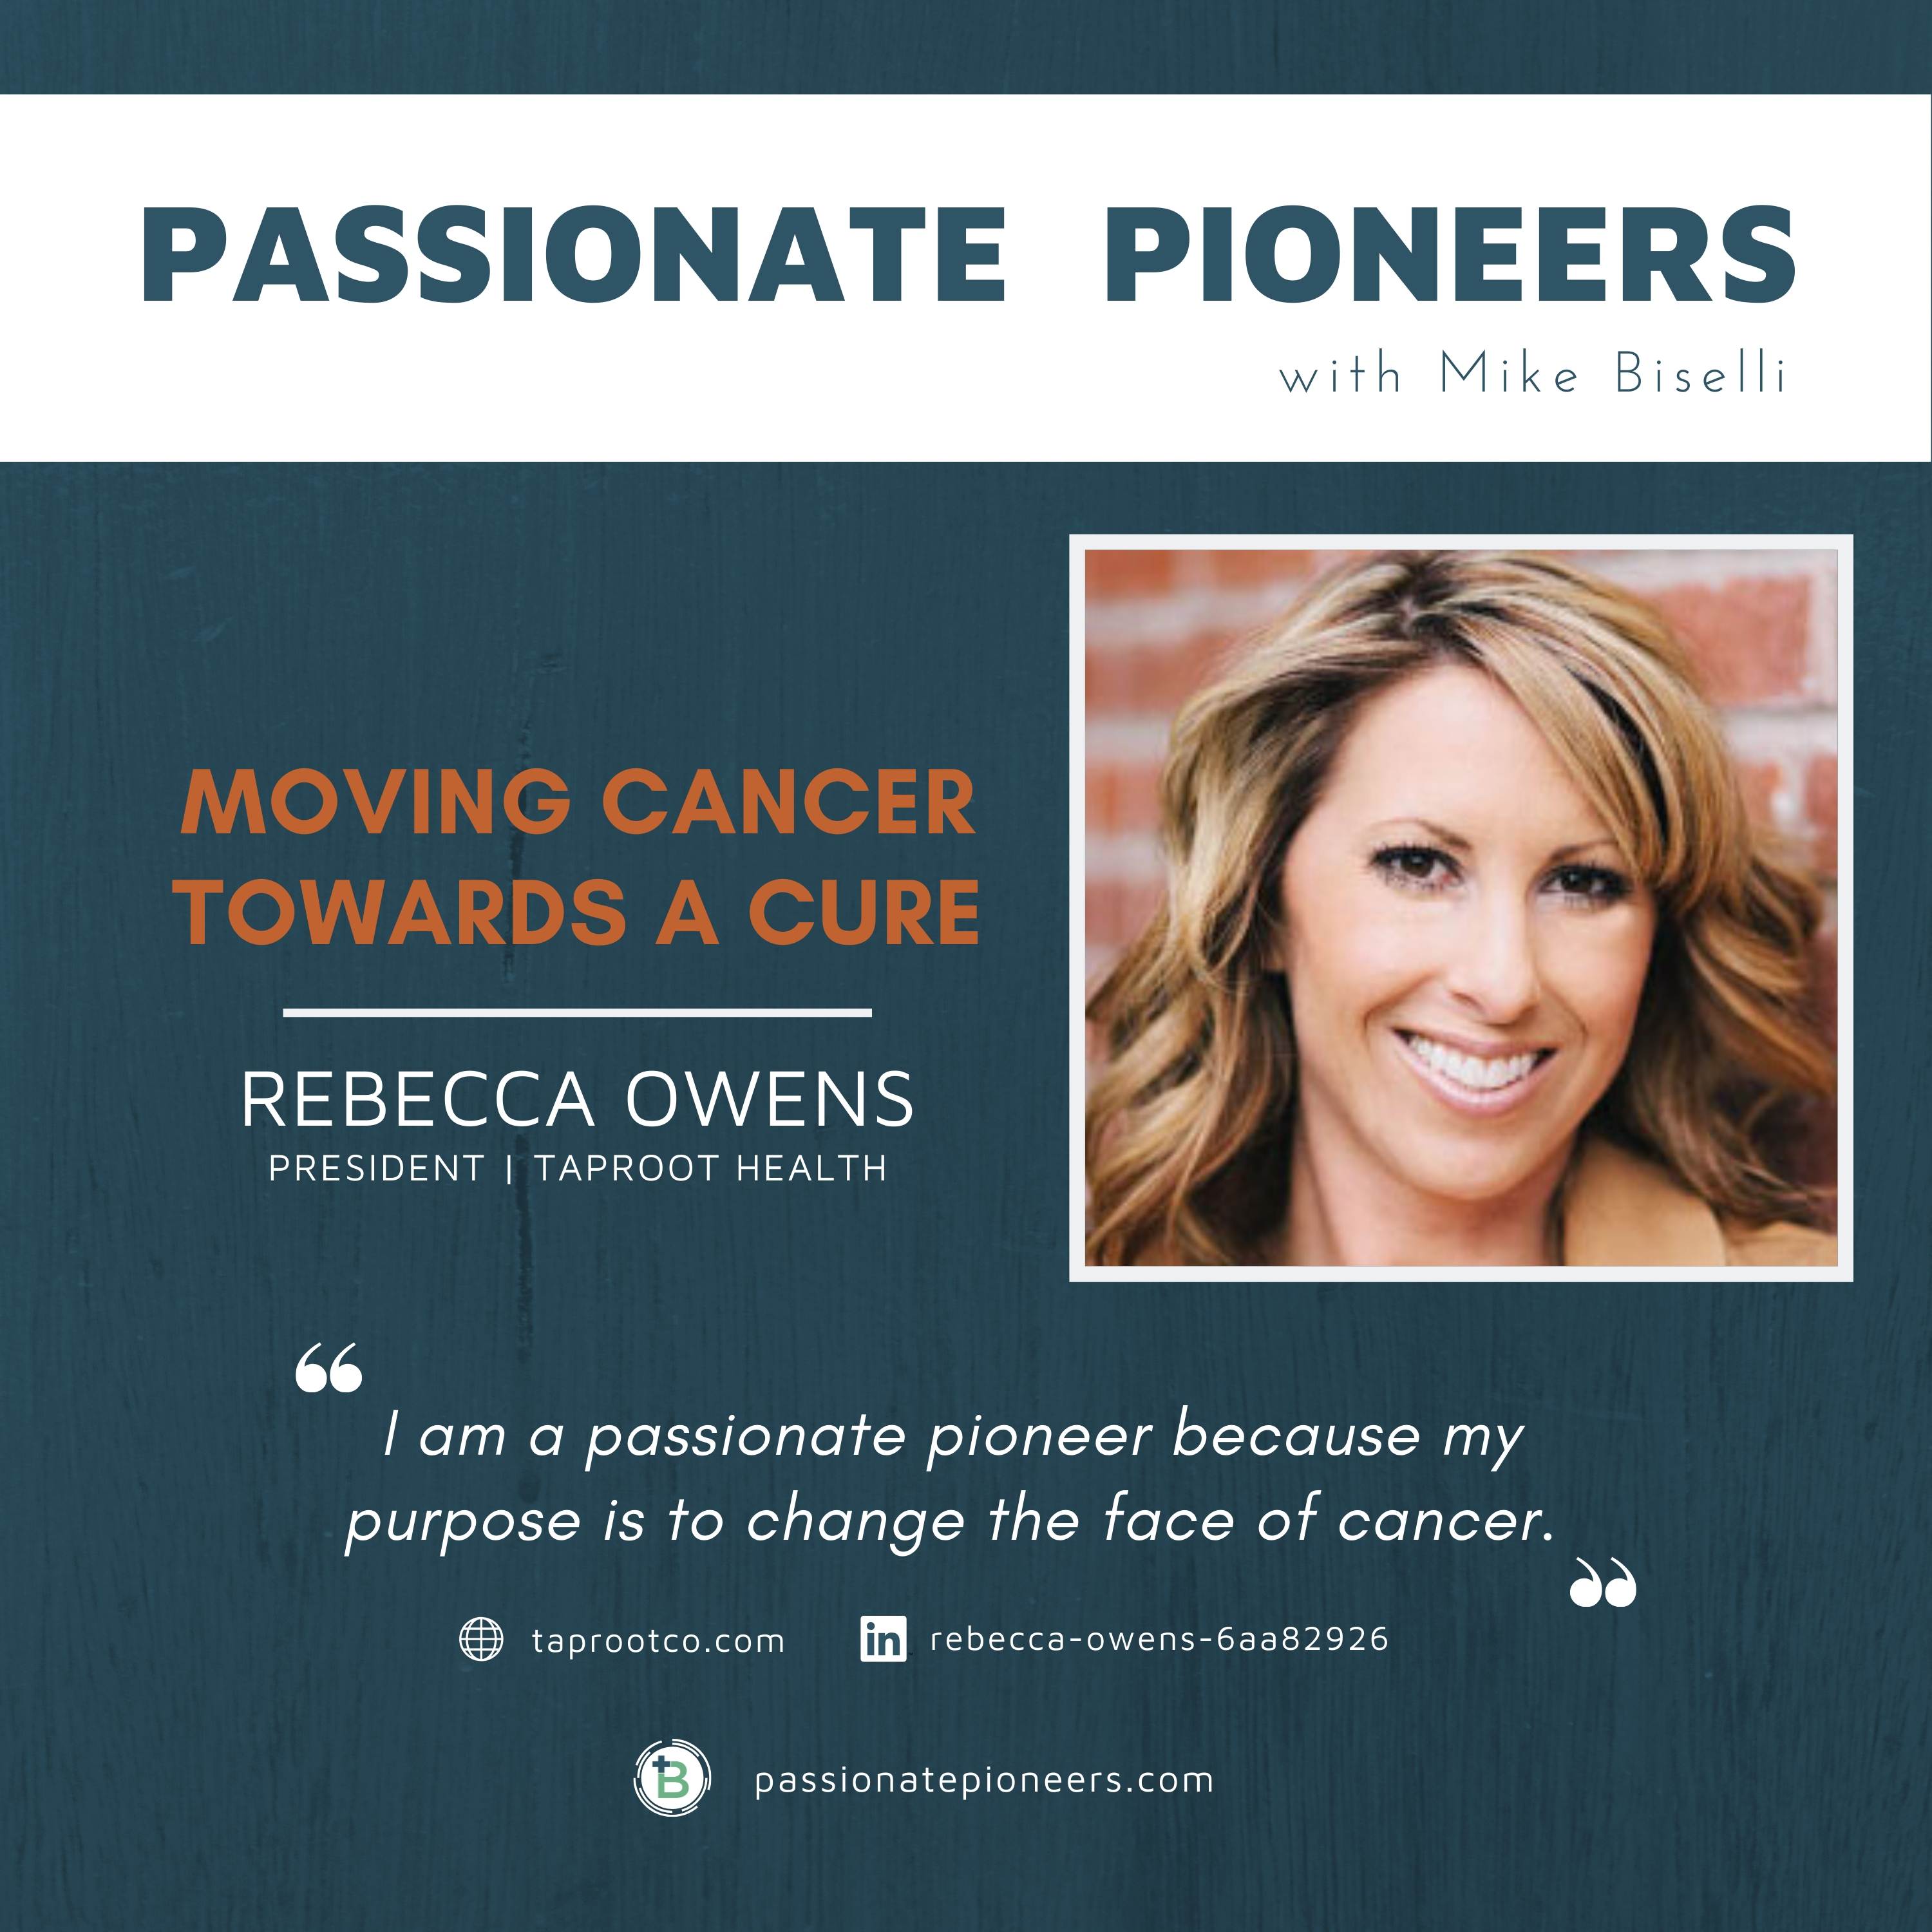 Moving Cancer Towards a Cure